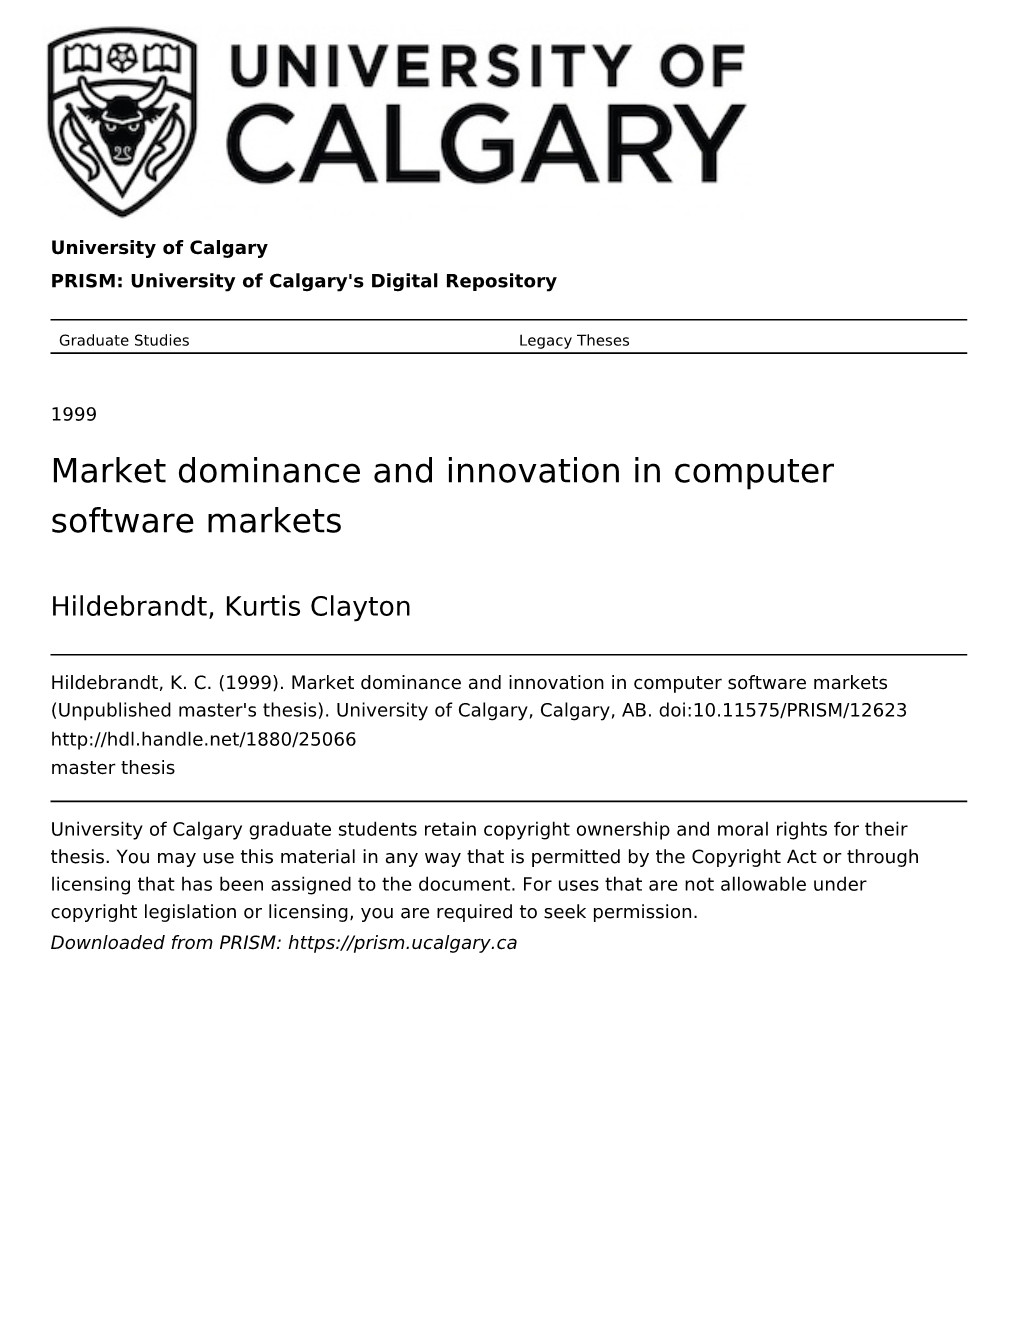 Market Dominance and Innovation in Computer Software Markets